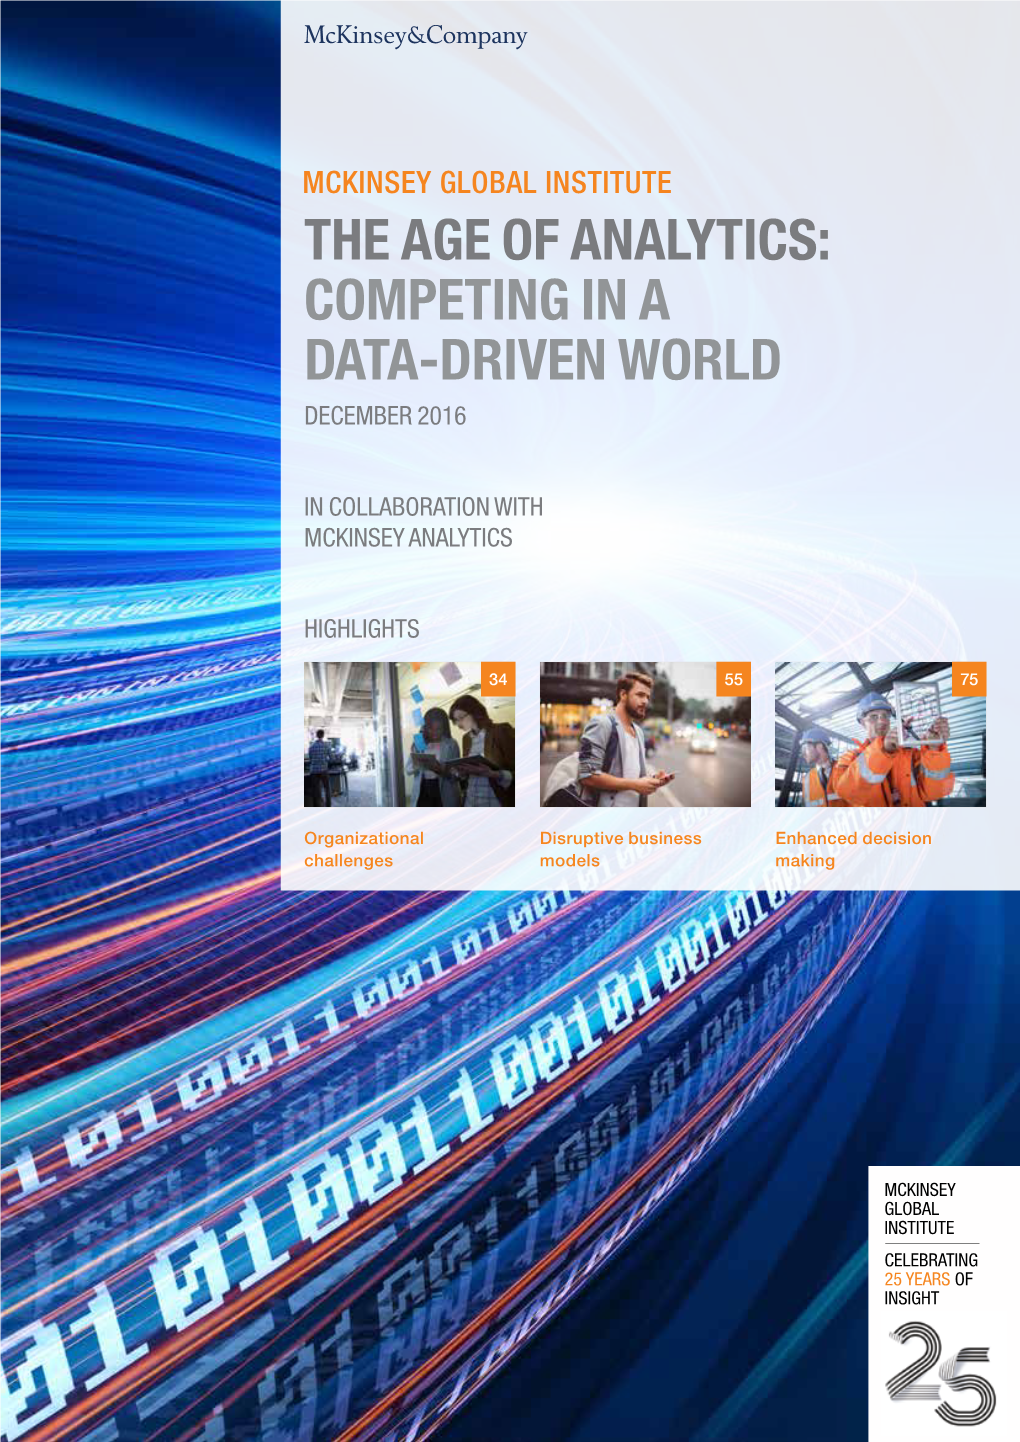 The Age of Analytics: Competing in a Data-Driven World December 2016